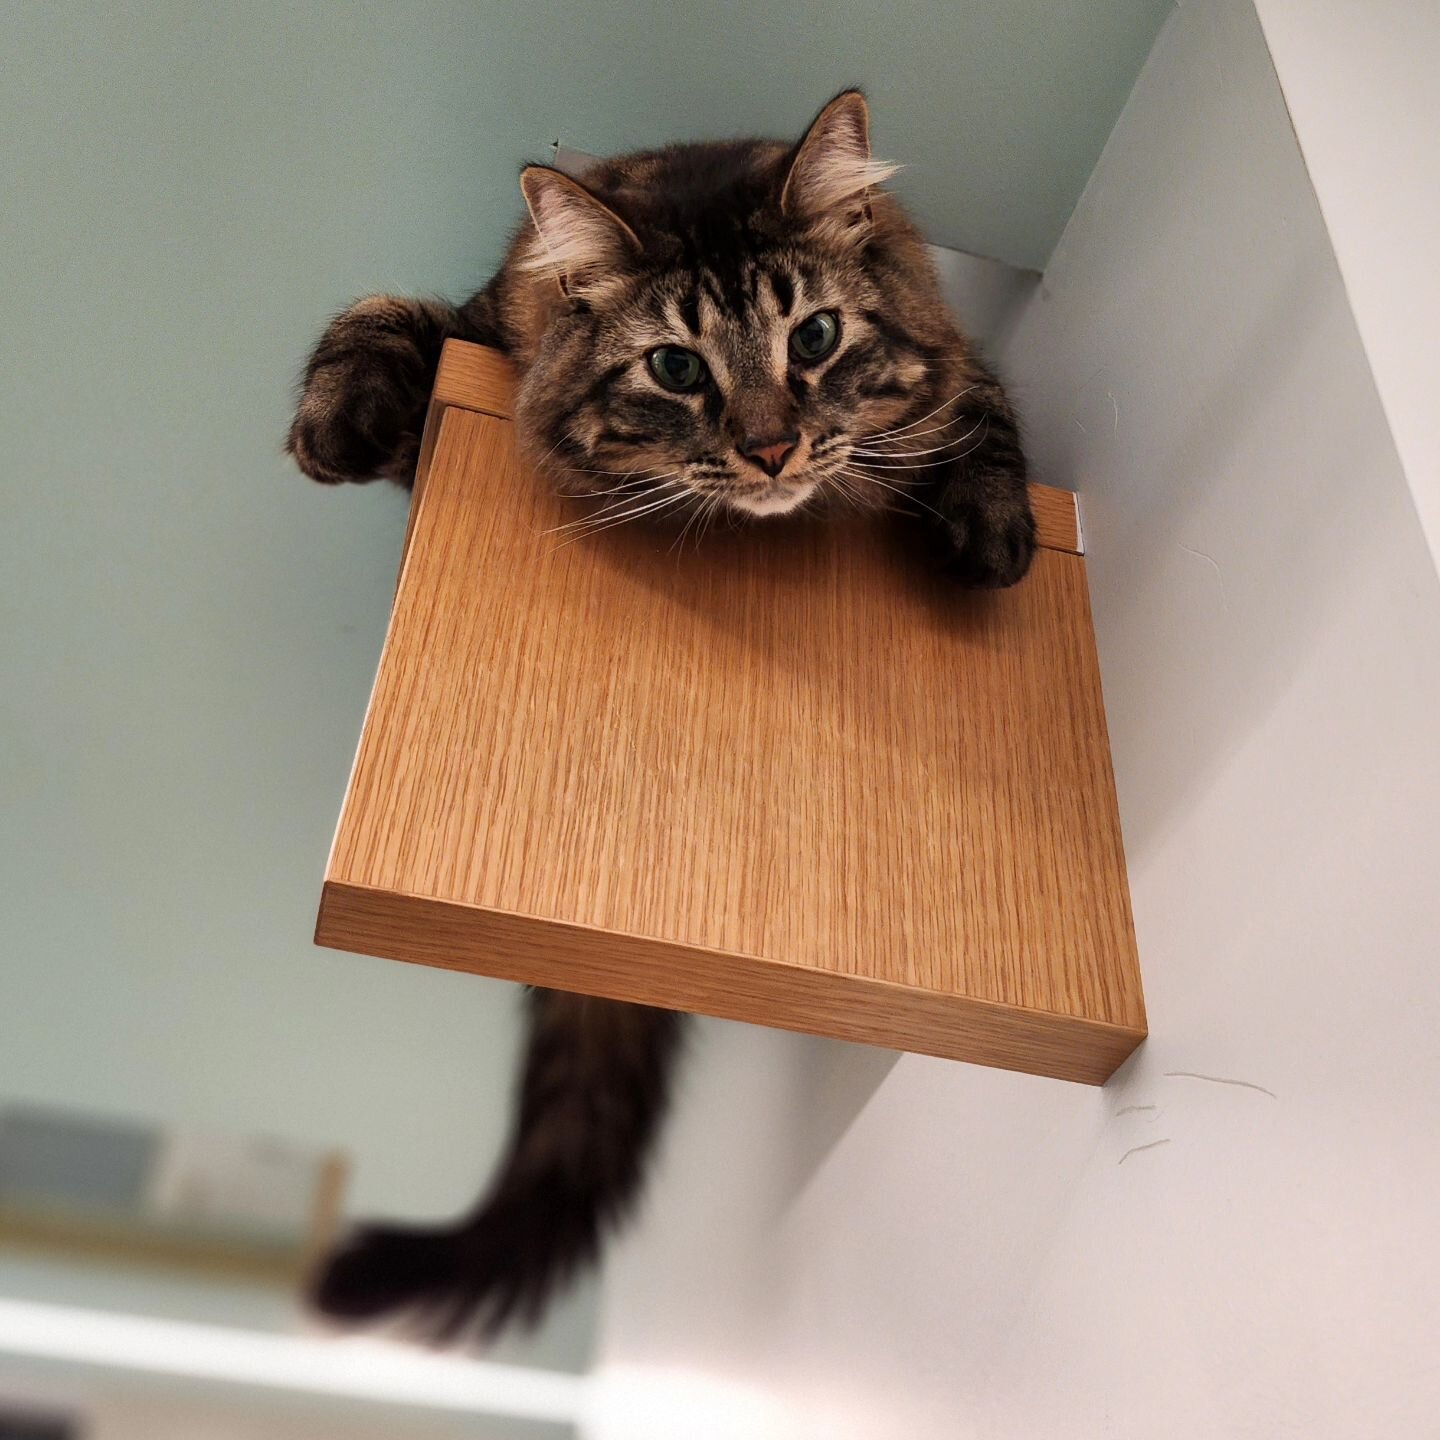 McSweeney is ready to come home and play! This fluffy gentleman is still up for adoption, so if you're looking for an affectionate and sweet tabby, look no further. ❤️ Come visit him today!